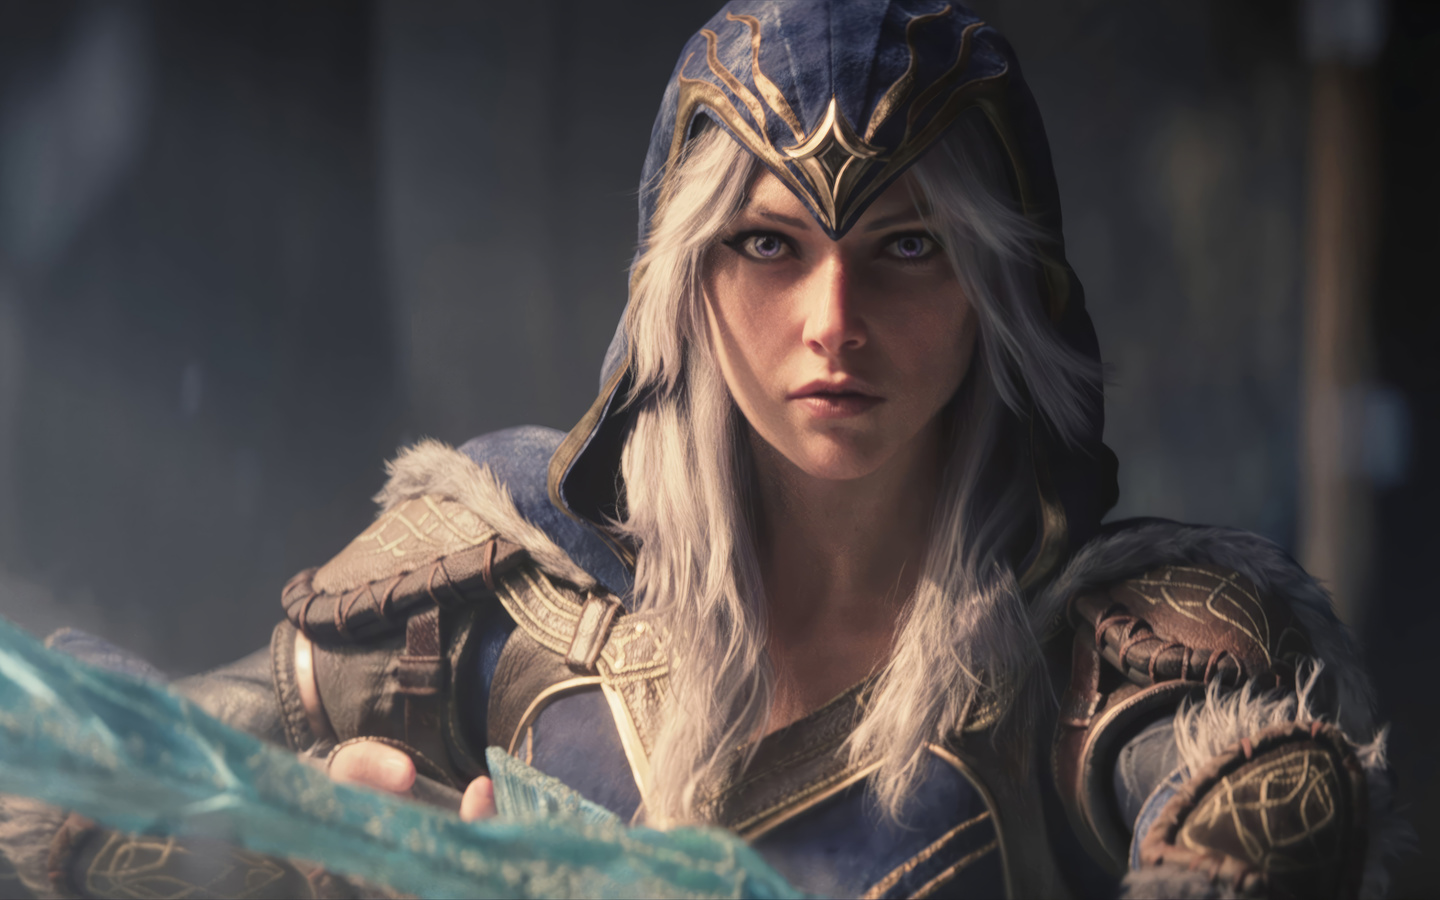 ashe, still here, season 2024 cinematic, league of legends, video game